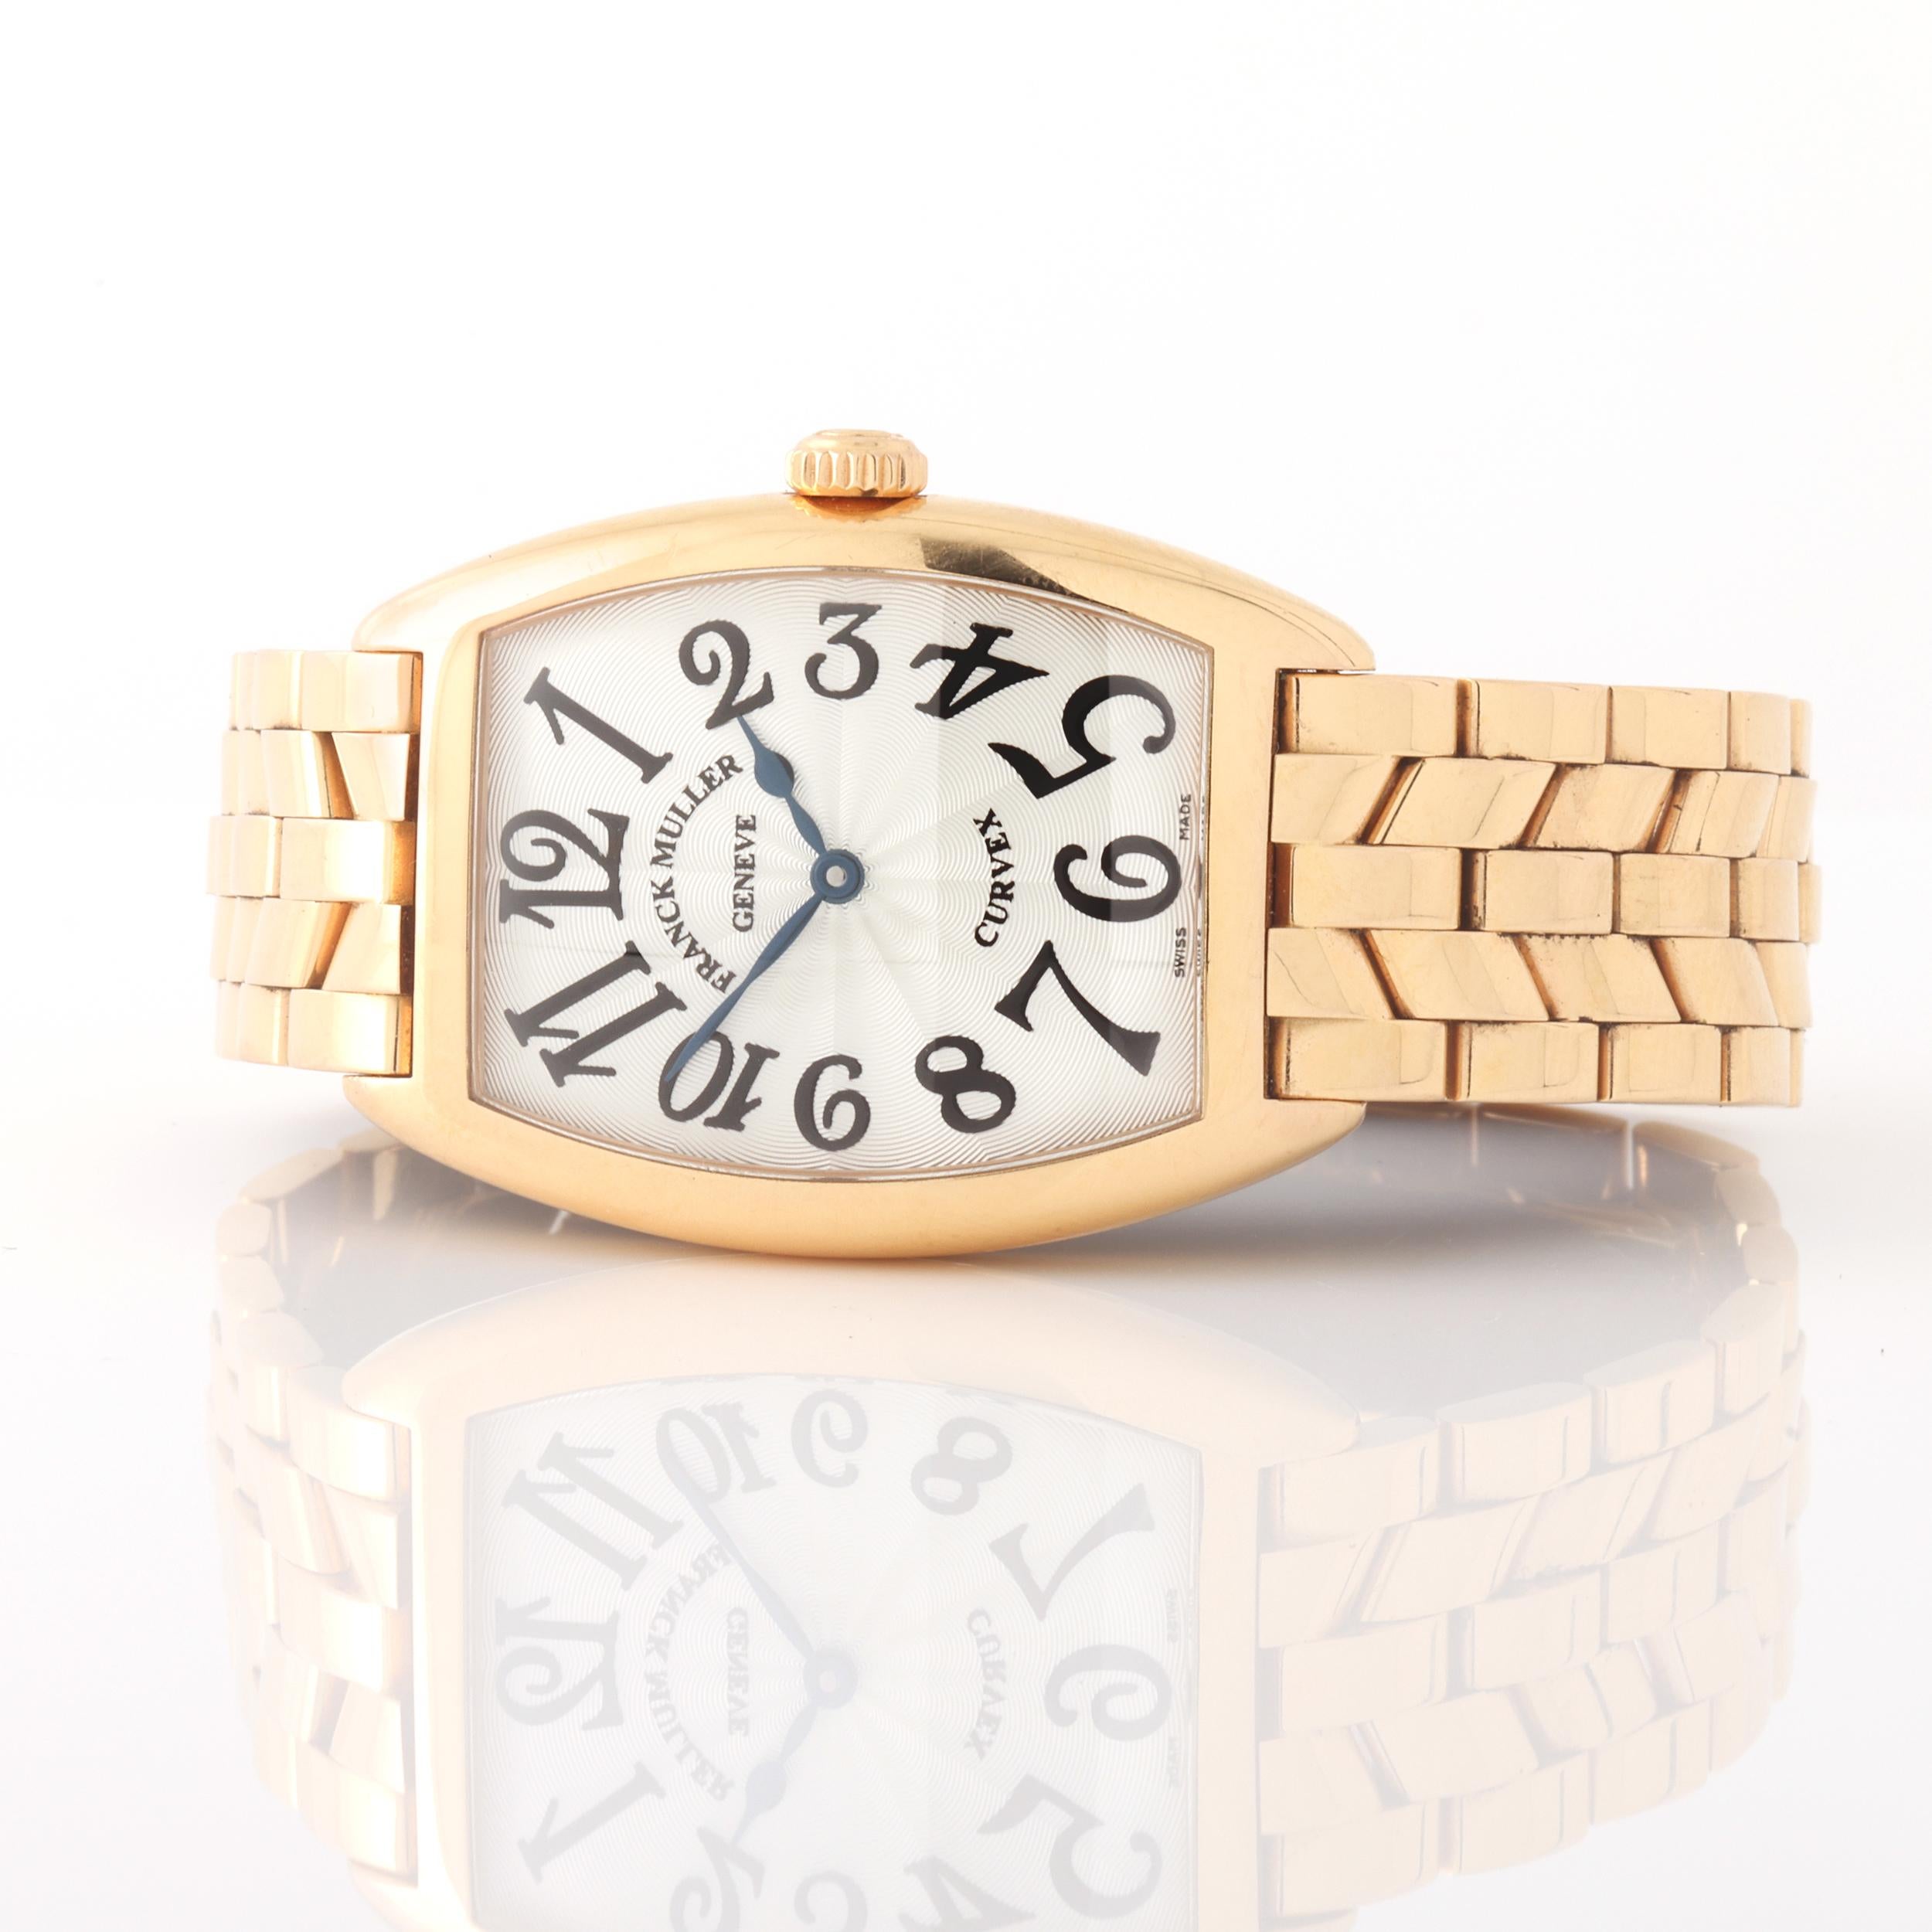 Franck Muller 7502 QZ Cintree Curvex Ladies Rose Gold Watch, very slighty worn in excellent condition, comes complete with original box . 

Brand: Franck Muller 
Model: Cintree Curvex
Model Number: 7502 QZ
Gender: Ladies 
Length: 7